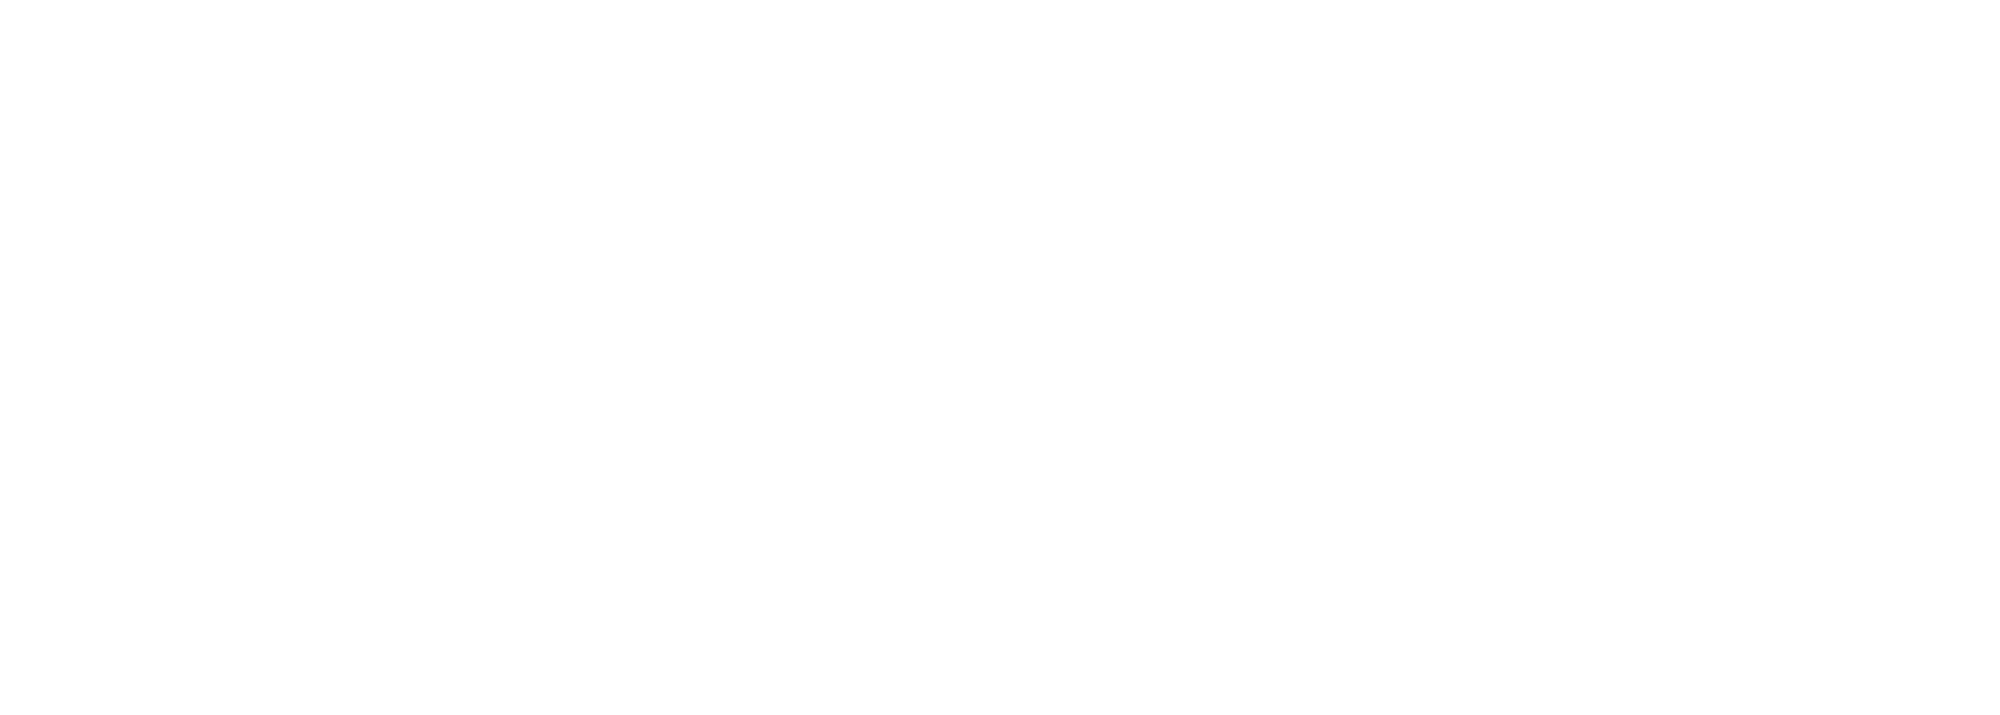 Golf for Joy Austin presented by NFP